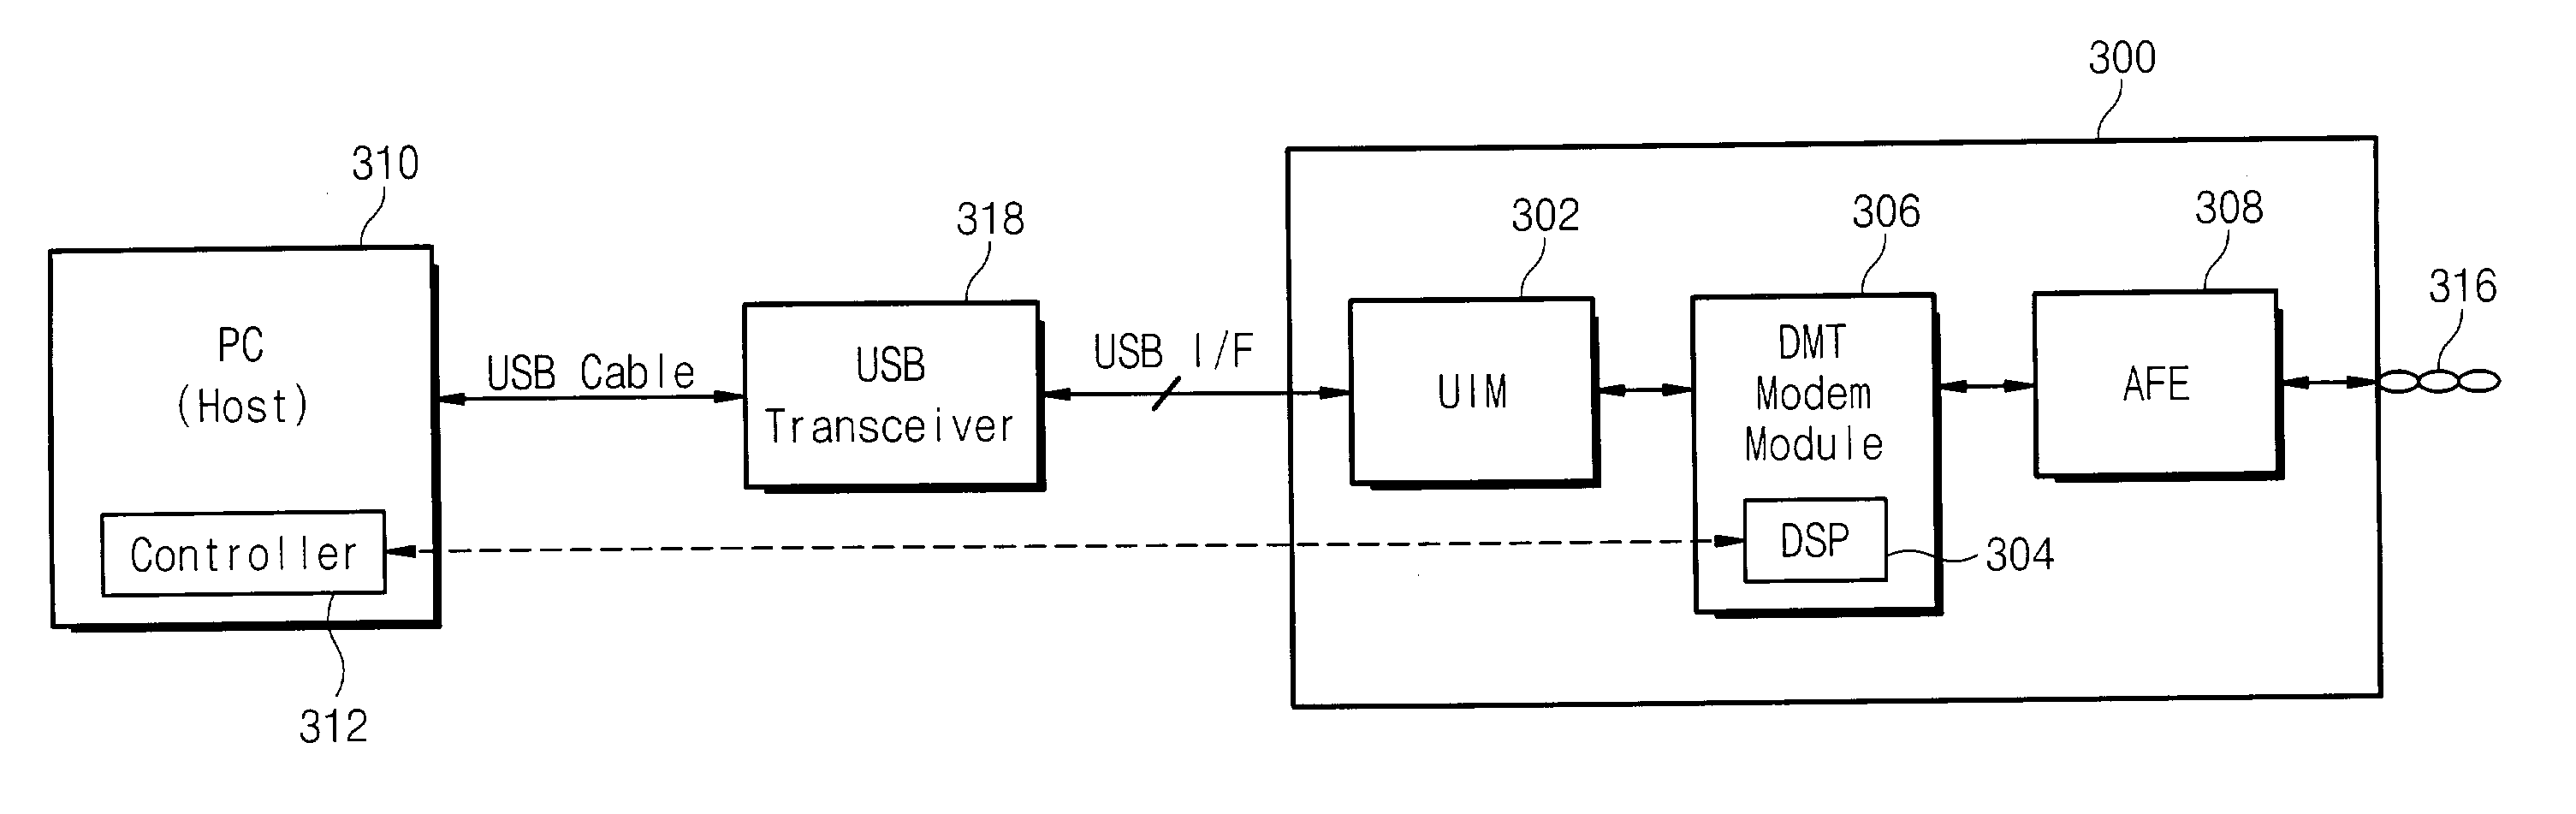 Digital subscriber line (DSL) modems supporting high-speed universal serial bus (USB) interfaces and related methods and computer program products